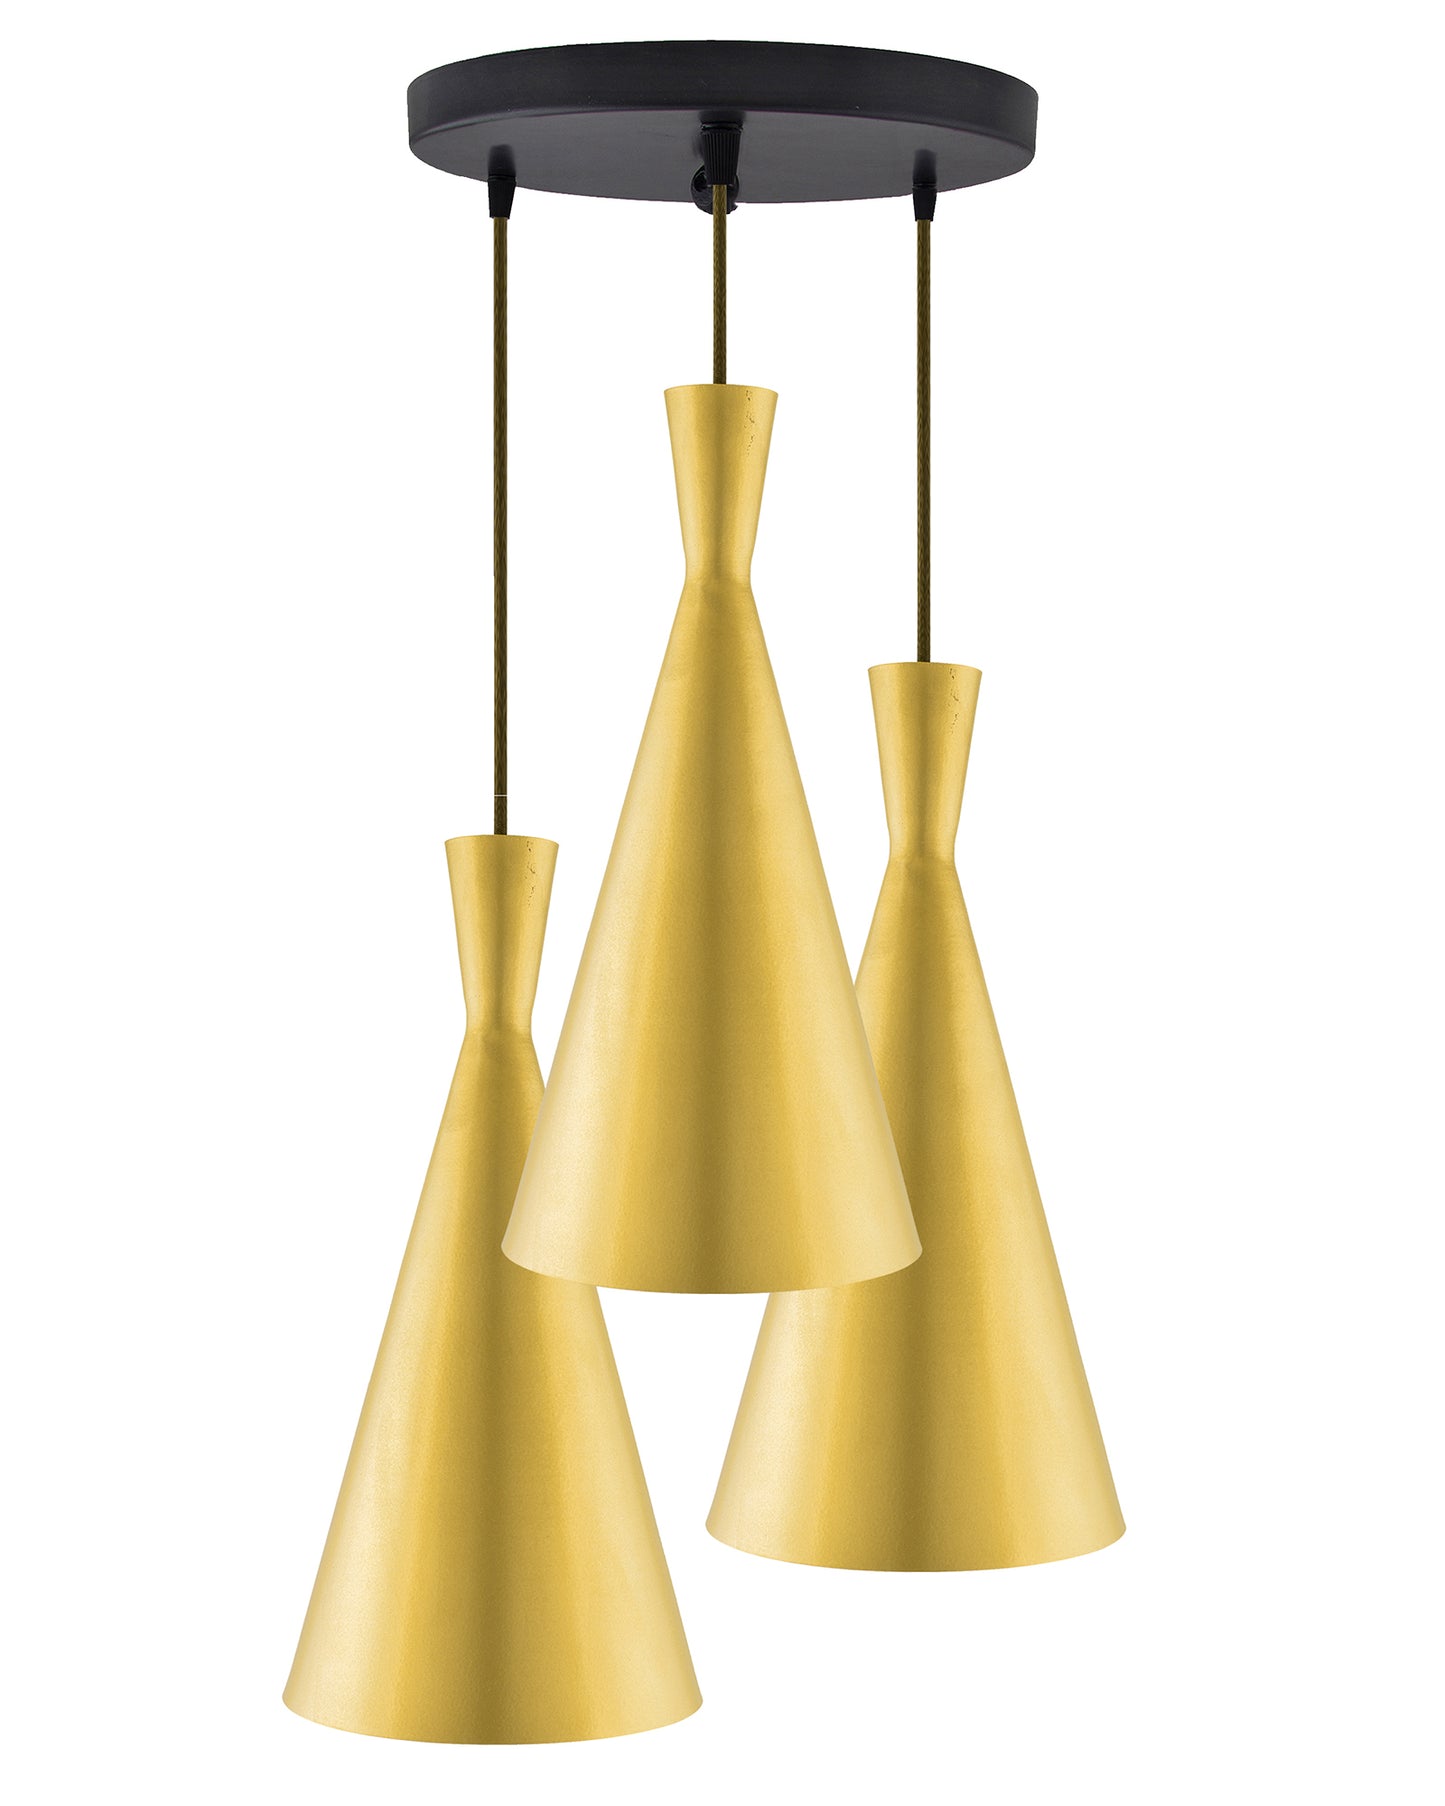 3-Lights Round Cluster Chandelier Modern Inverted Cone Shaped hanging Light, E27 Holder, Decorative,URBAN Retro, Nordic Style